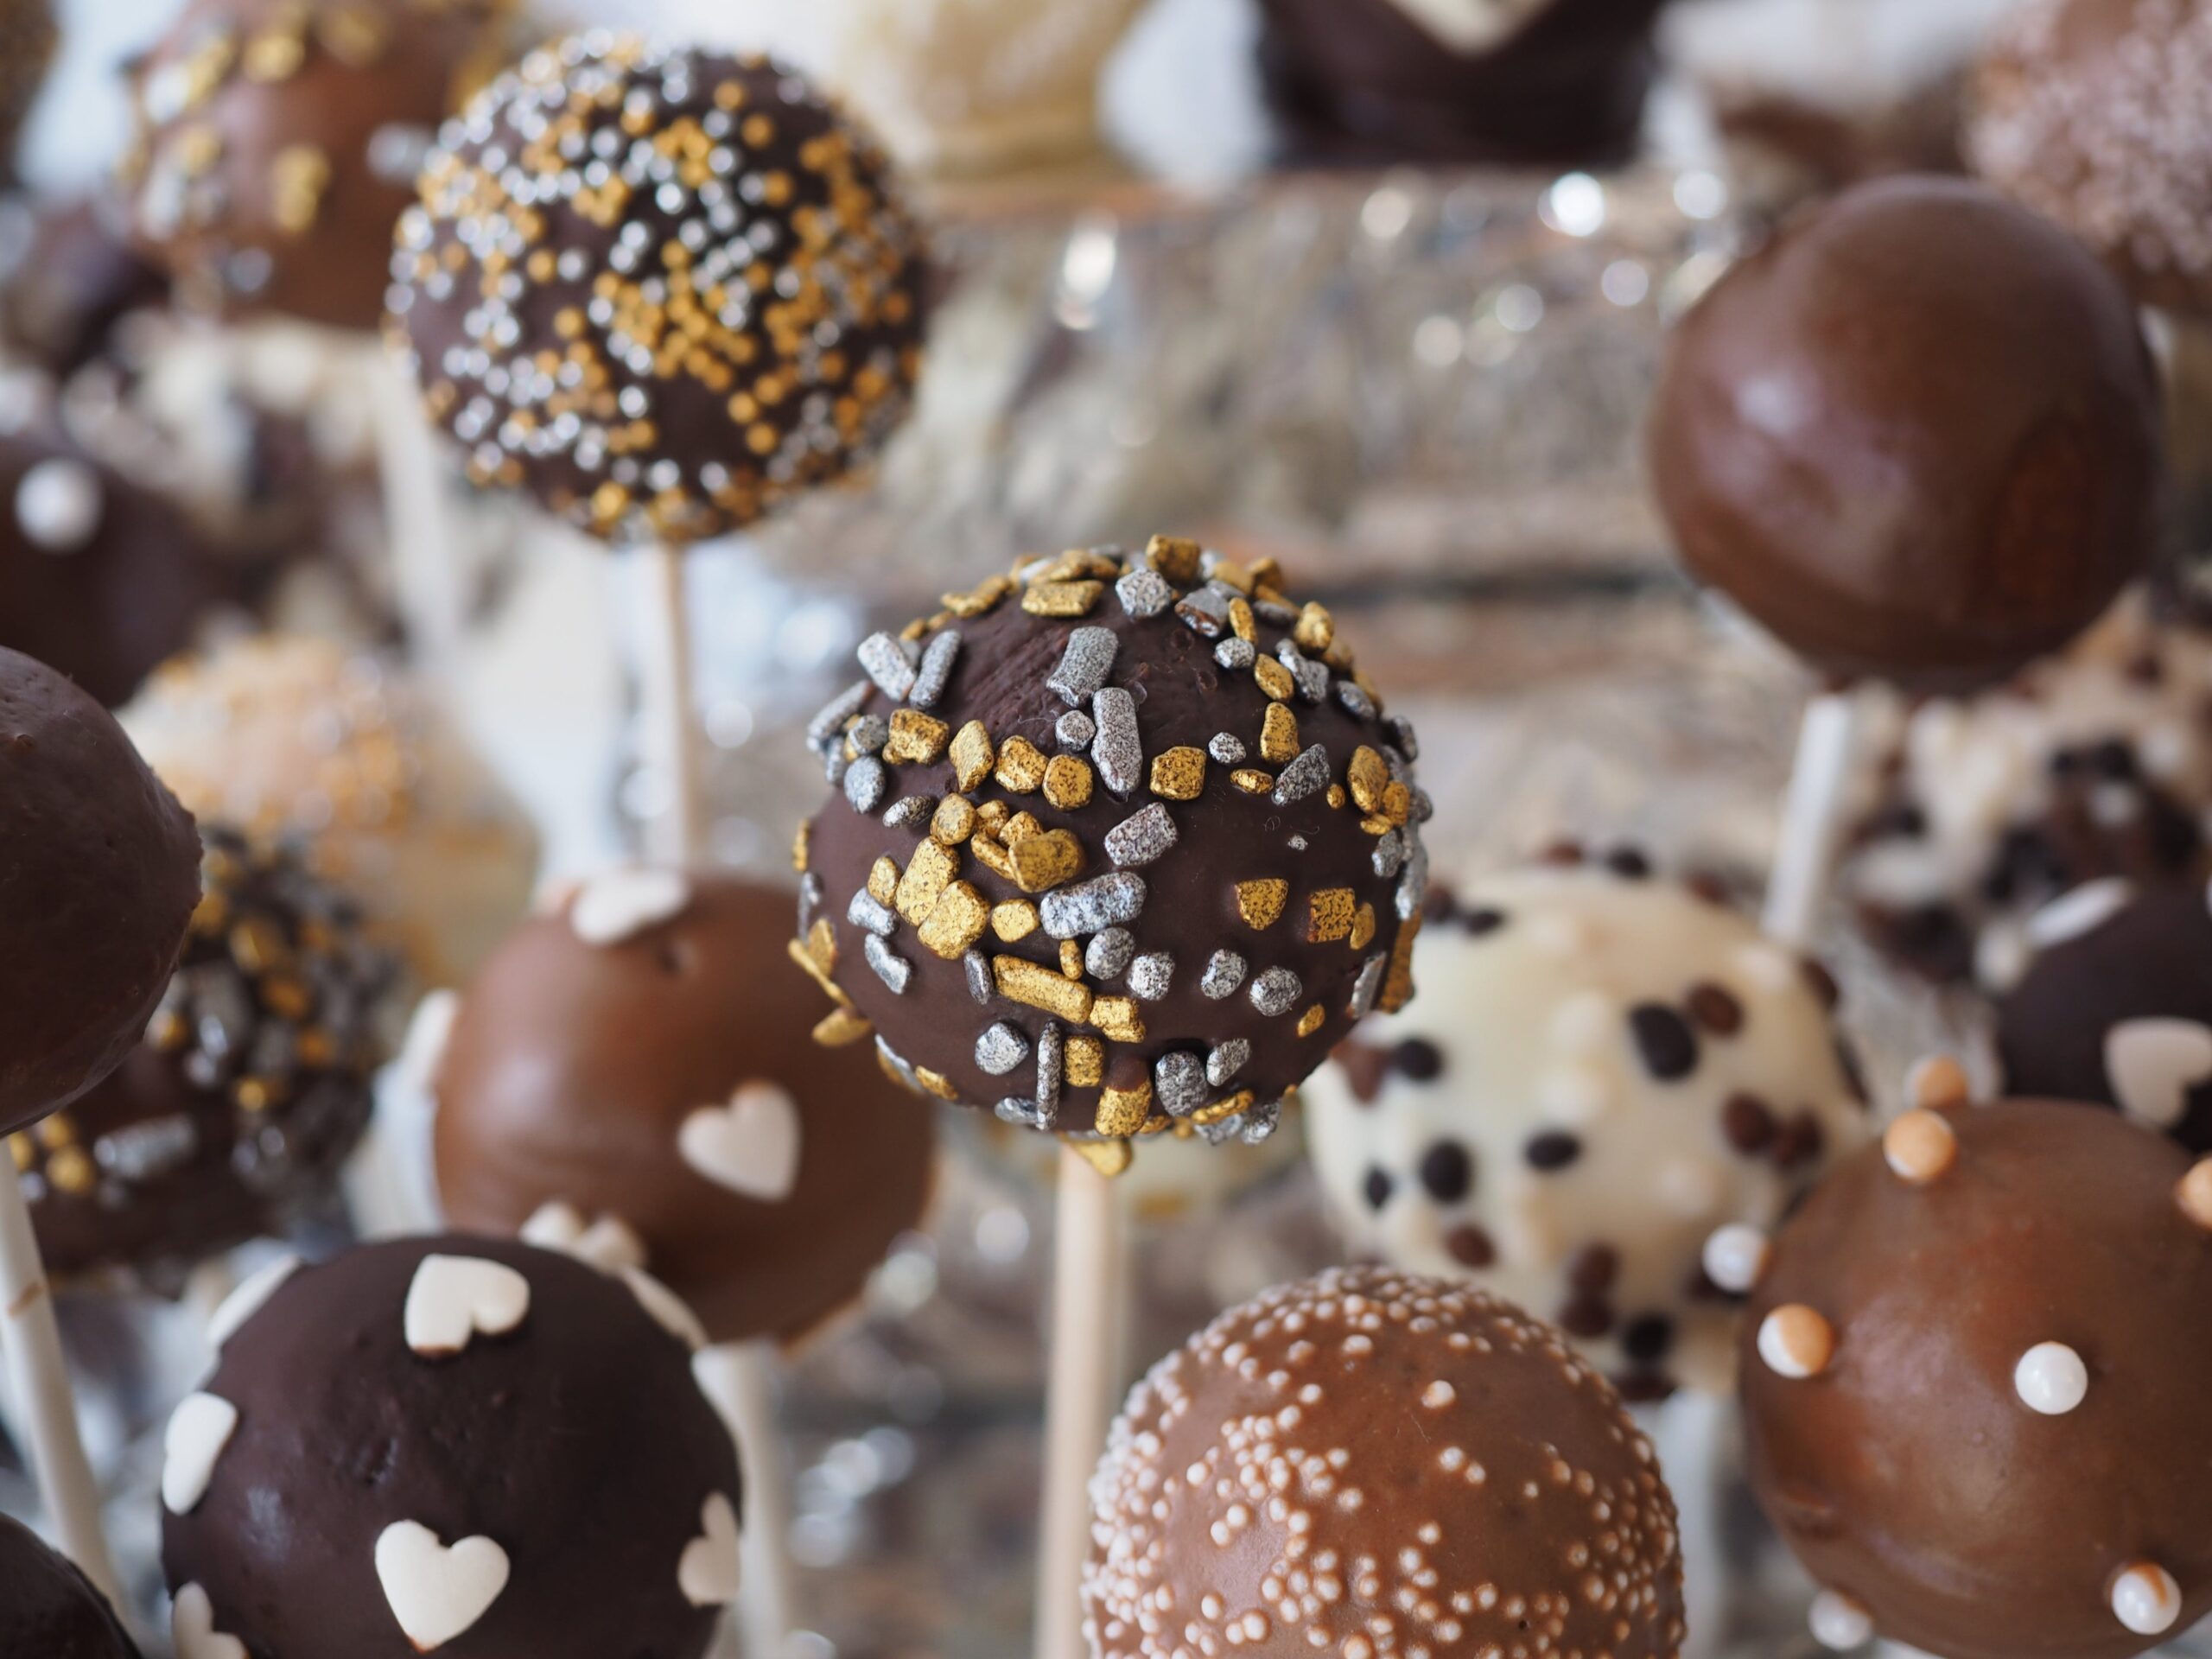 The Art Of Chocolate Making: Truffles And Bonbons